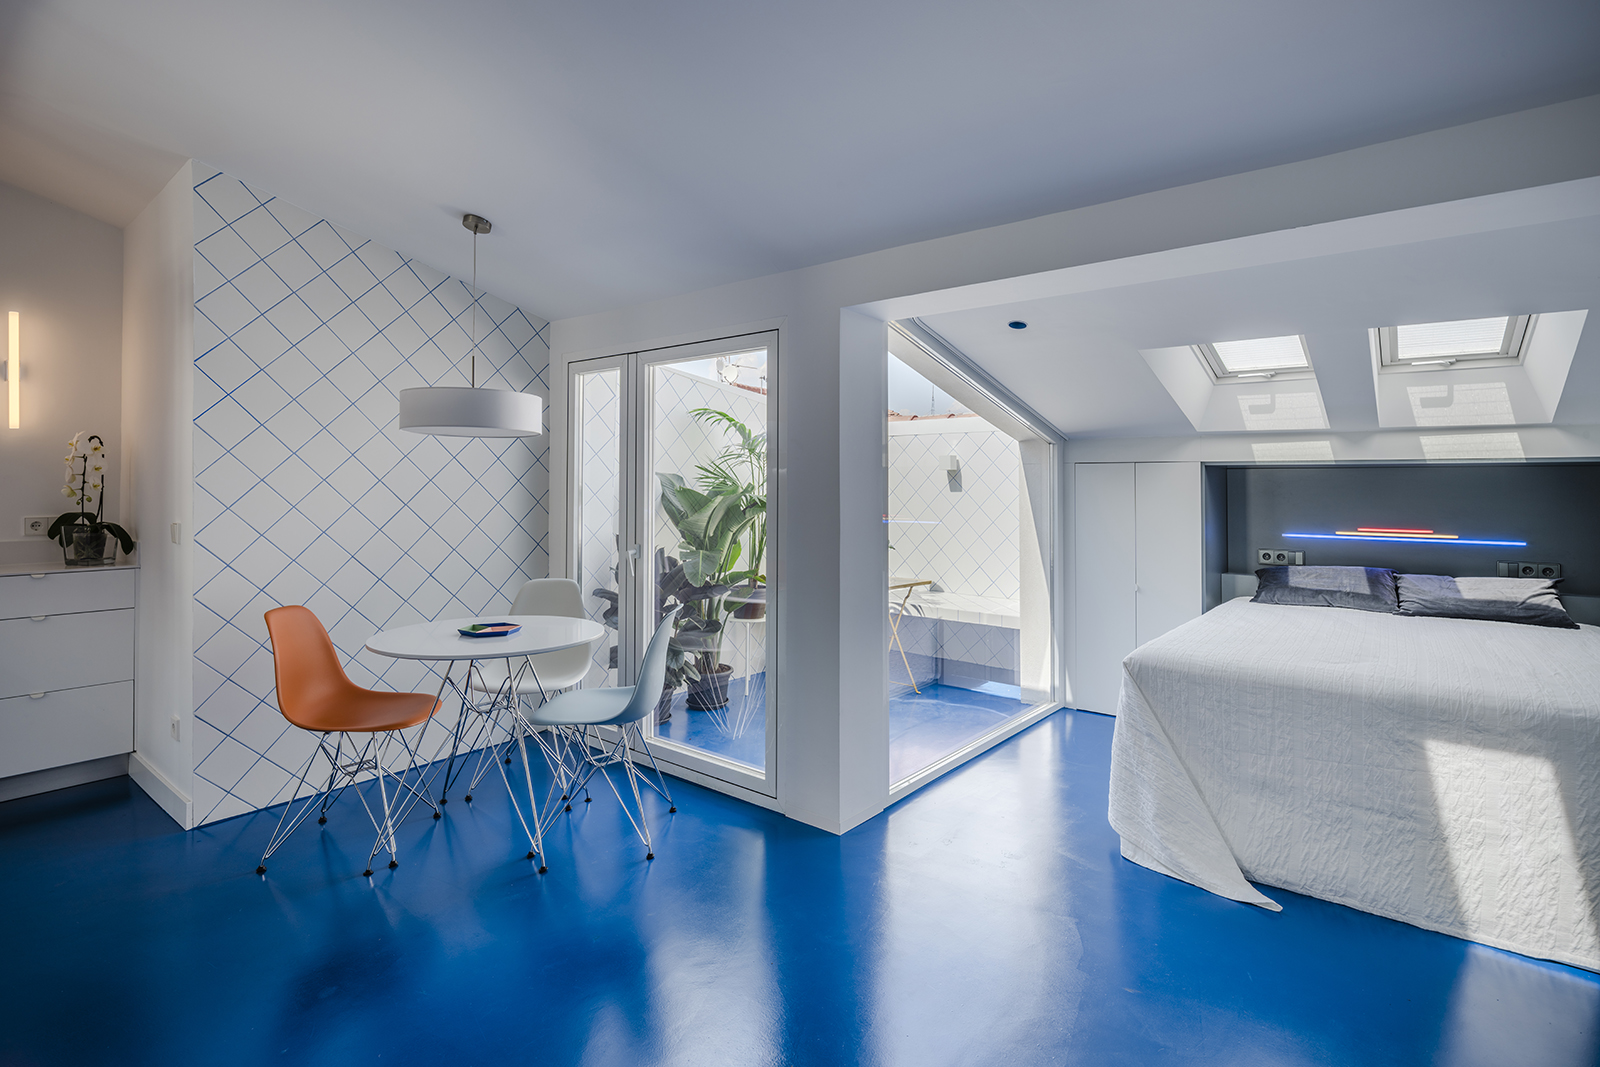 Archisearch Beach House: Renovation of an attic in the Lavapiés neighborhood | gon architects